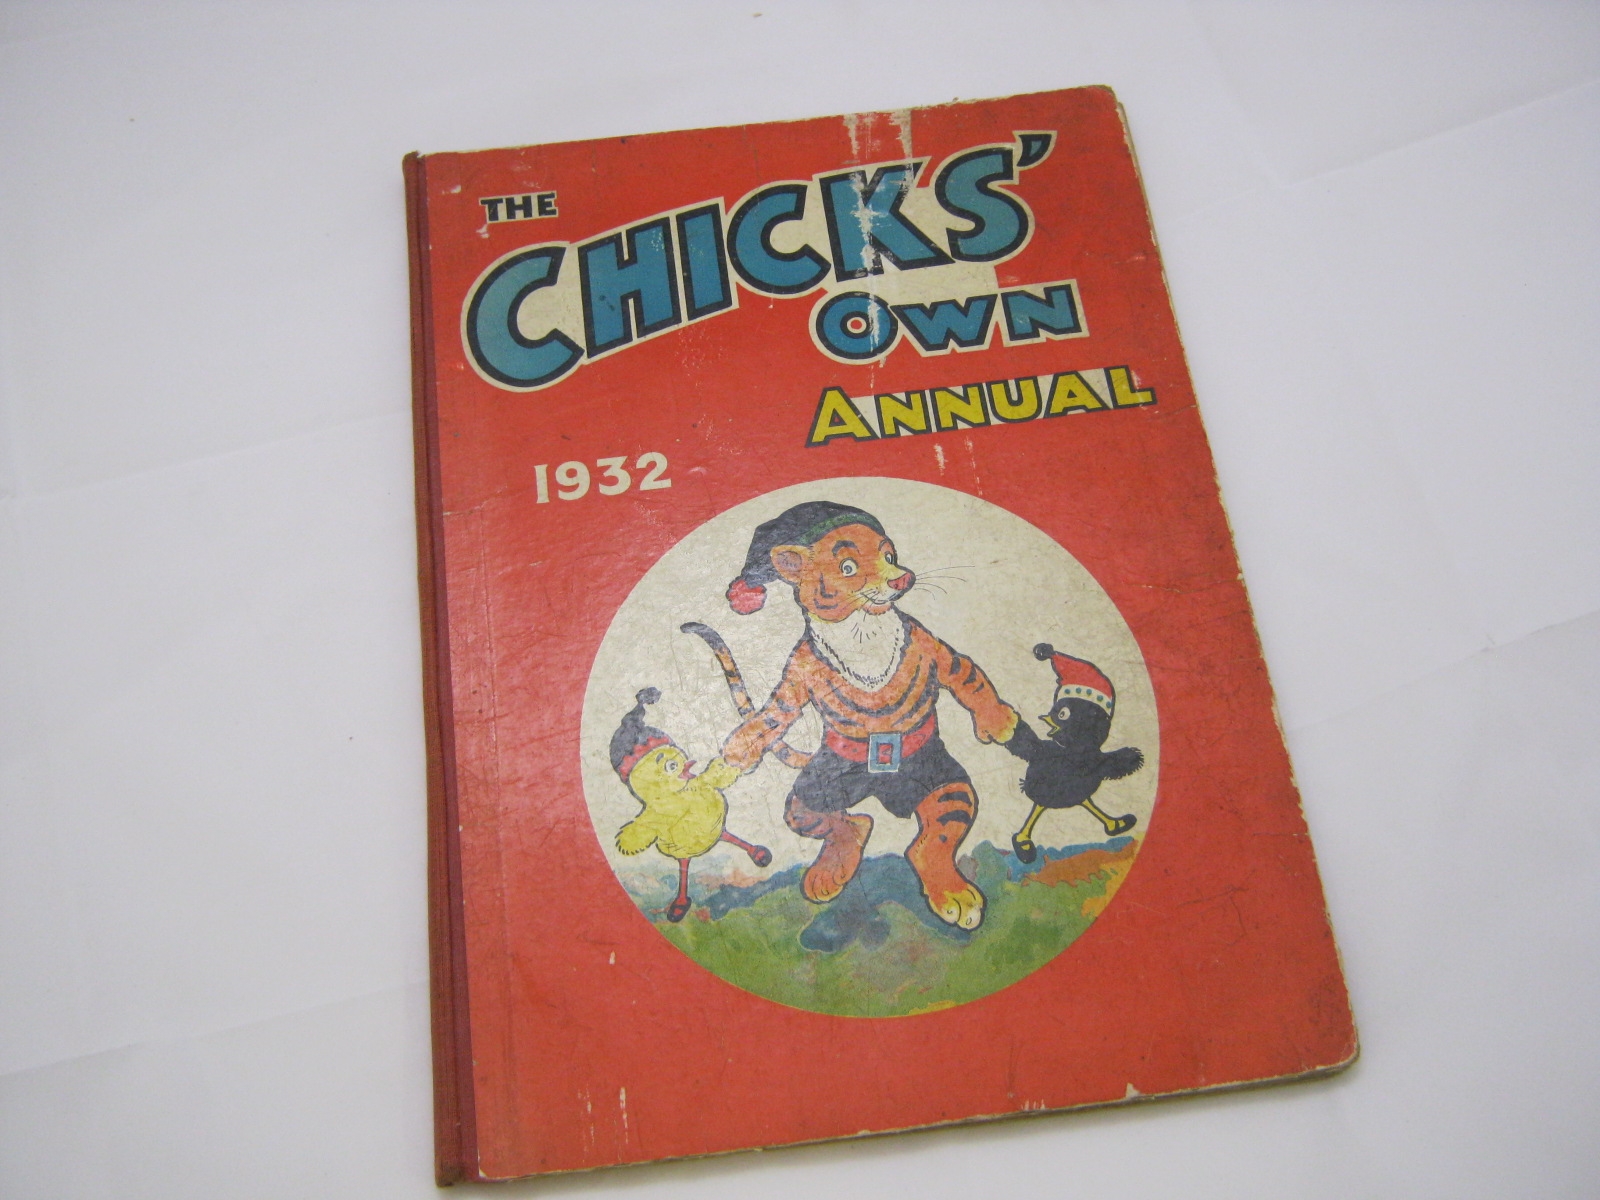 THE CHICKS' OWN ANNUAL, 1932, fo, orig cl bkd pict bds worn